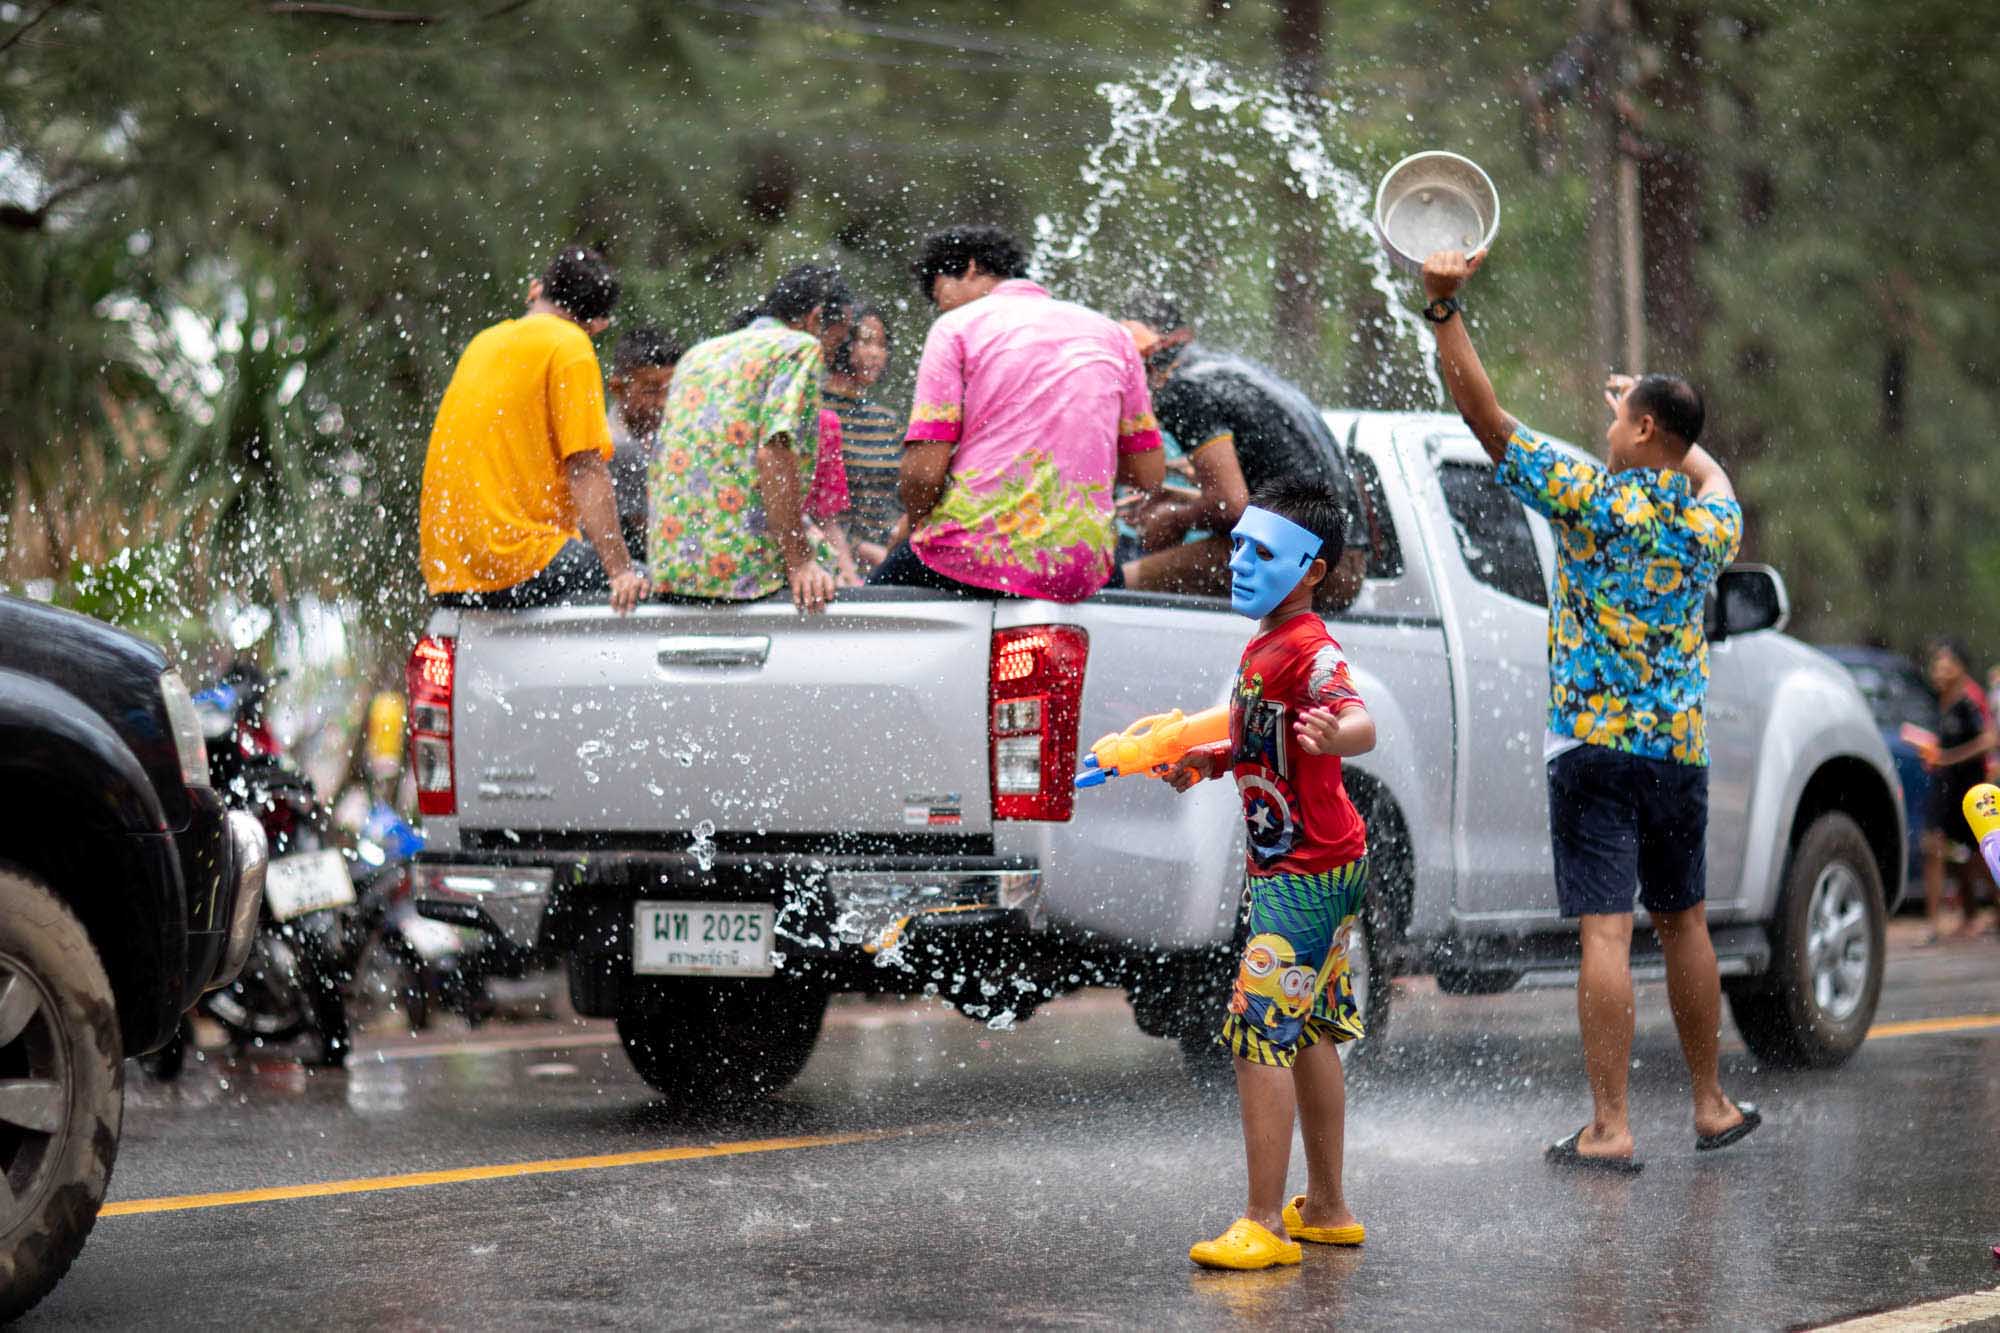 Boy wearing a mask and taunting a truck during water fight at Songkran water festival in Phuket, Thailand